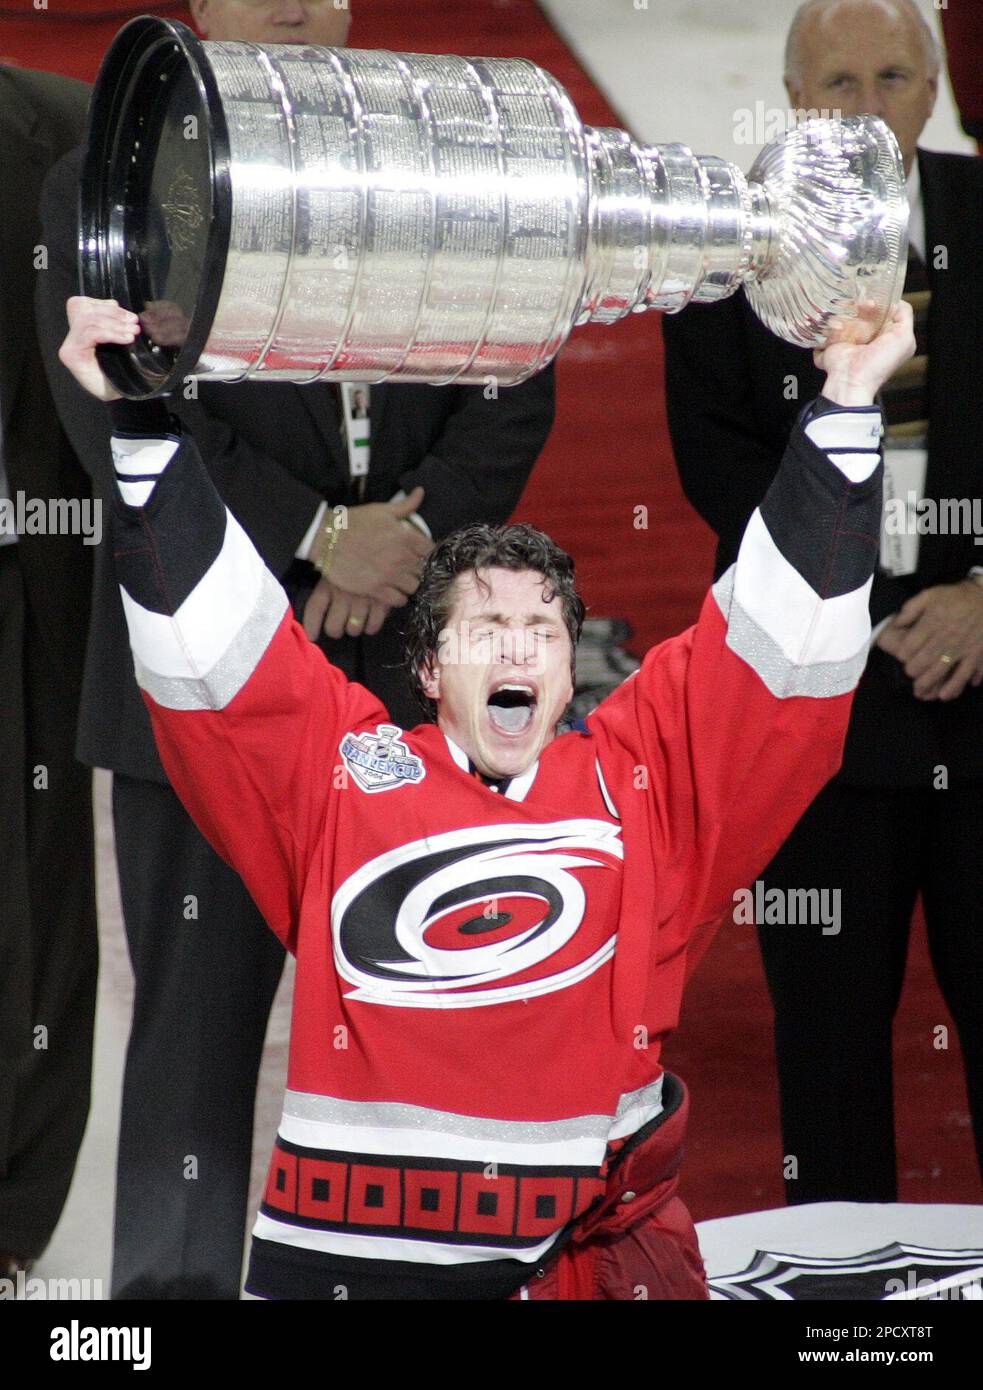 10 years later, Brind'Amour cherishes lone Stanley Cup championship 